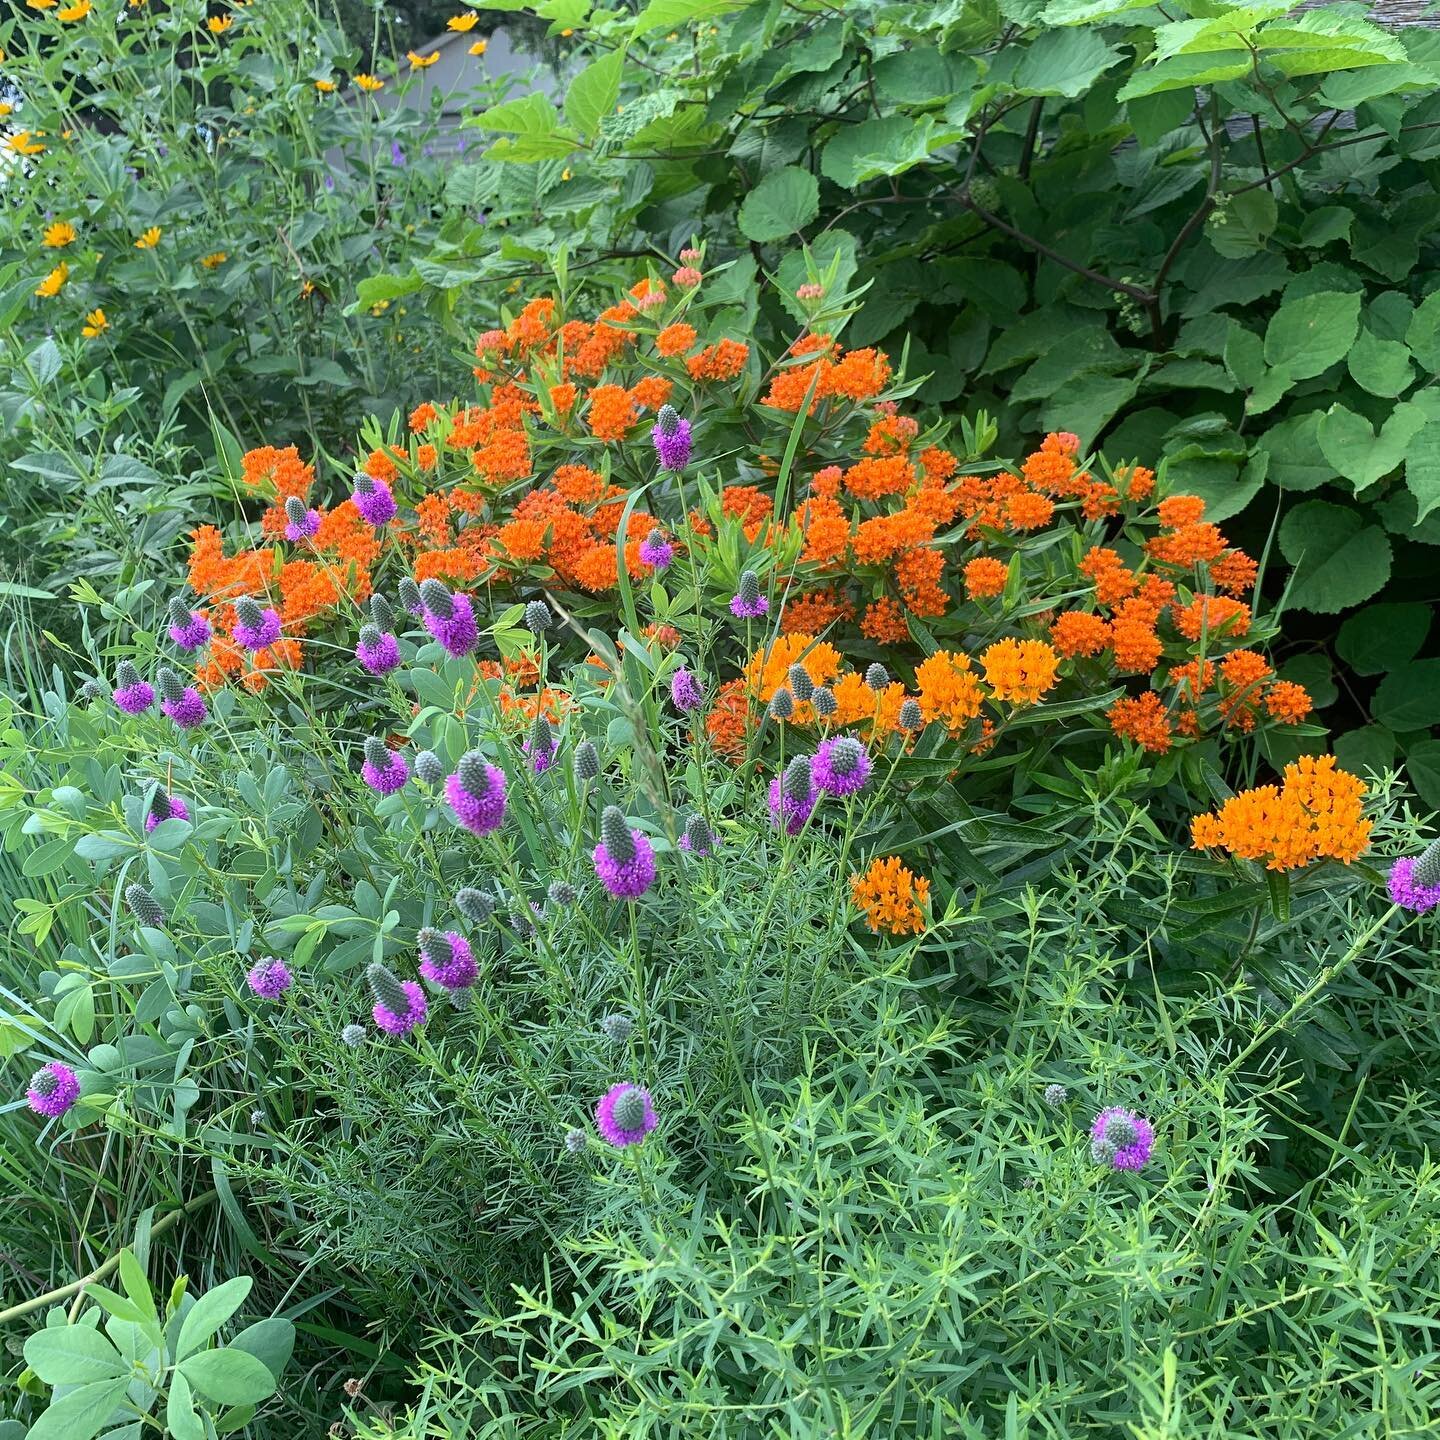 Did you know we still have native plants available for sale? Visit our online store to order from 50+ species and pick up at the farm. 
shop.sognvalleyfarm.com

It&rsquo;s an absolutely beautiful time to be surrounded by native gardens!

#nativeplant